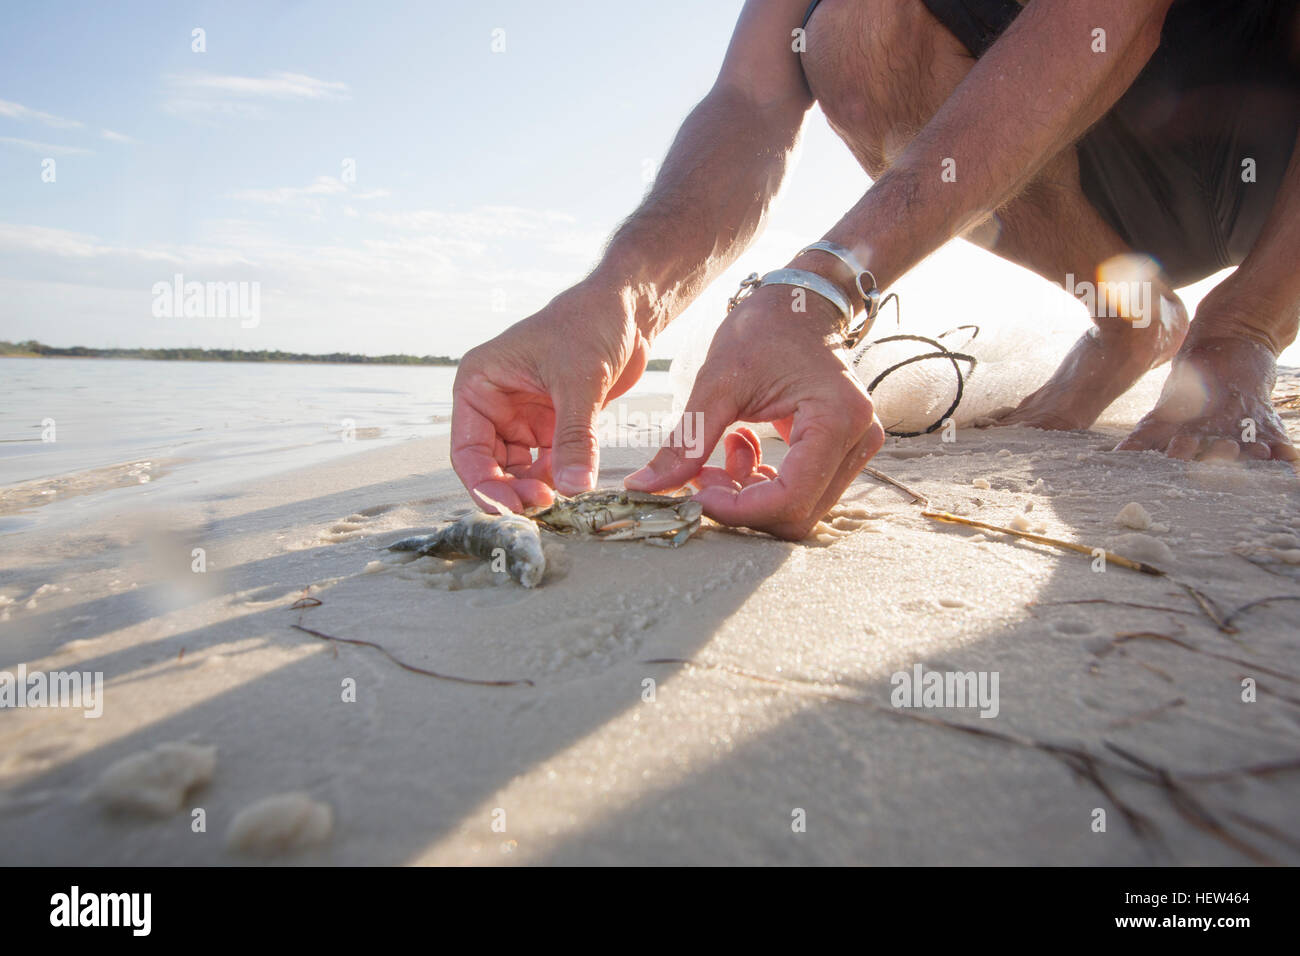 Man freeing crab and fish from net, Fort Walton Beach, Florida, USA Stock Photo